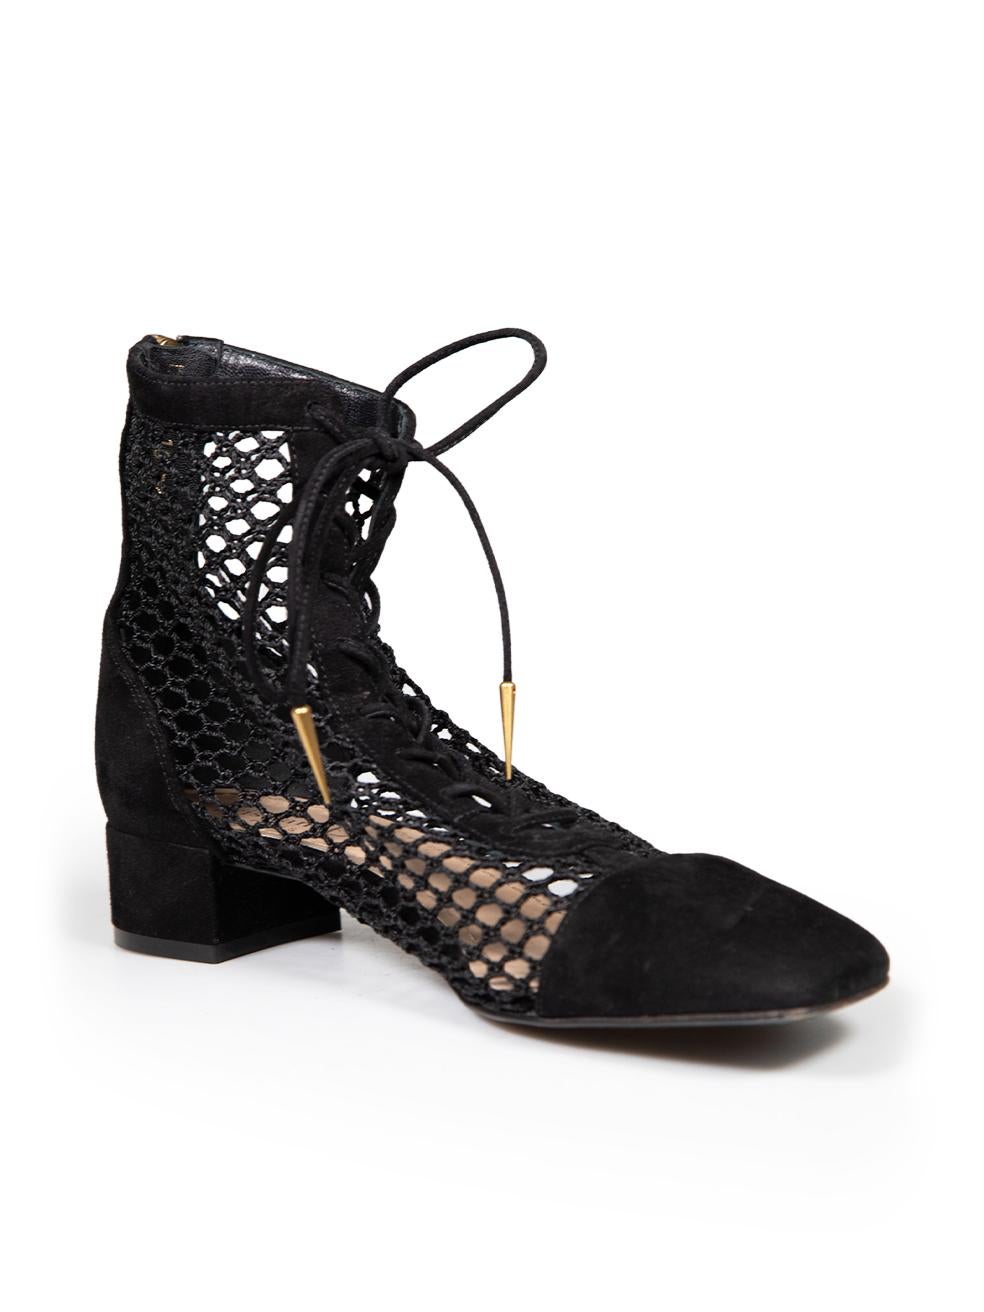 CONDITION is Very good. Minimal wear to the ankle boots is seen with some scuff marks that are evident on this used Dior designer resale item.
 
 
 
 Details
 
 
 Model: Naughtily D
 
 Black
 
 Suede
 
 Ankle heels
 
 See through net detail
 
 Lace